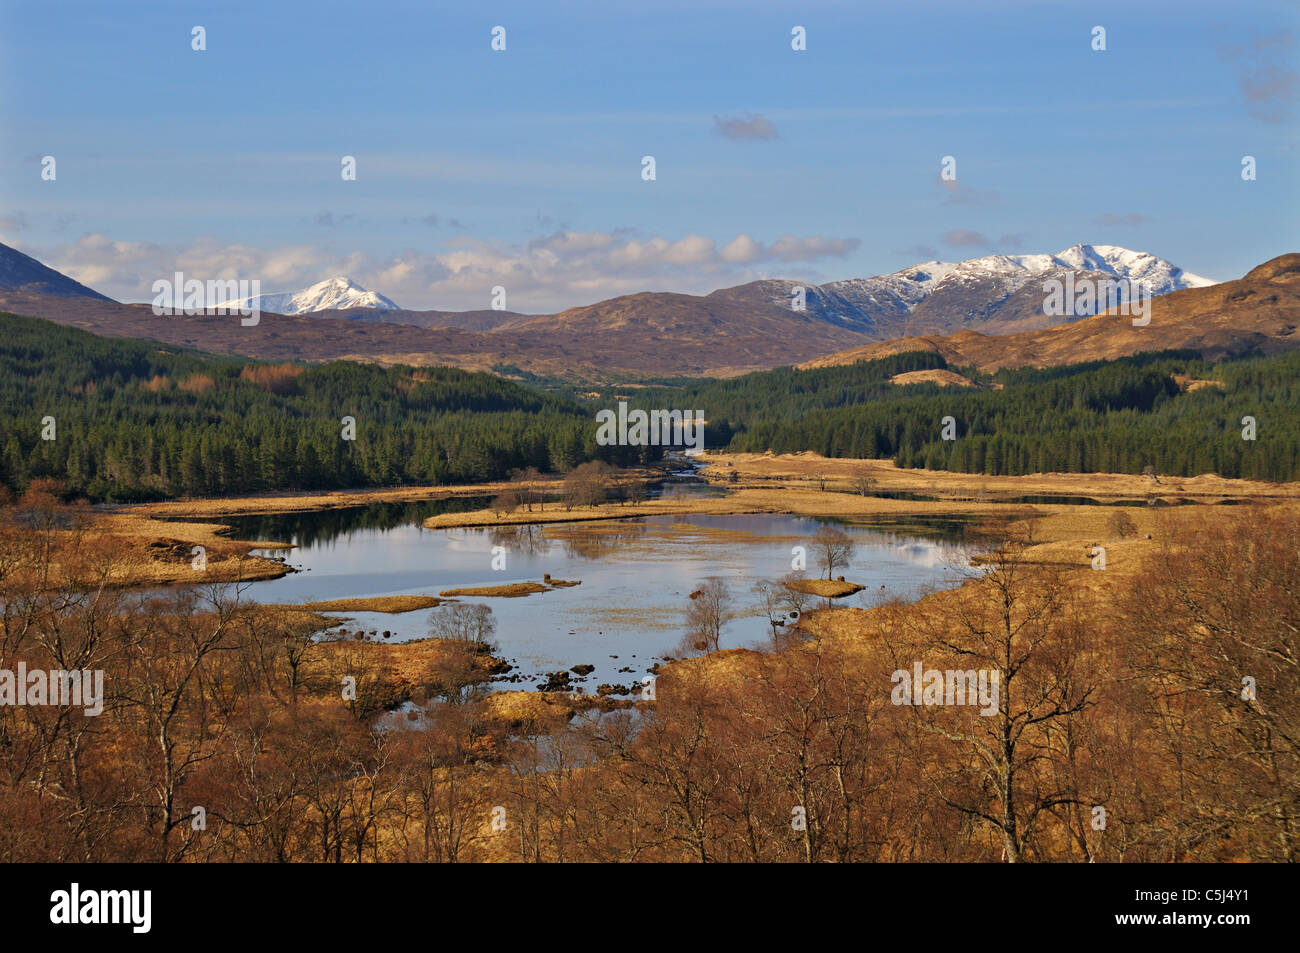 The broad River Garry, flanked by trees and with hills and snow-capped mountains behind, Glen Garry, western Scotland, UK. Stock Photo